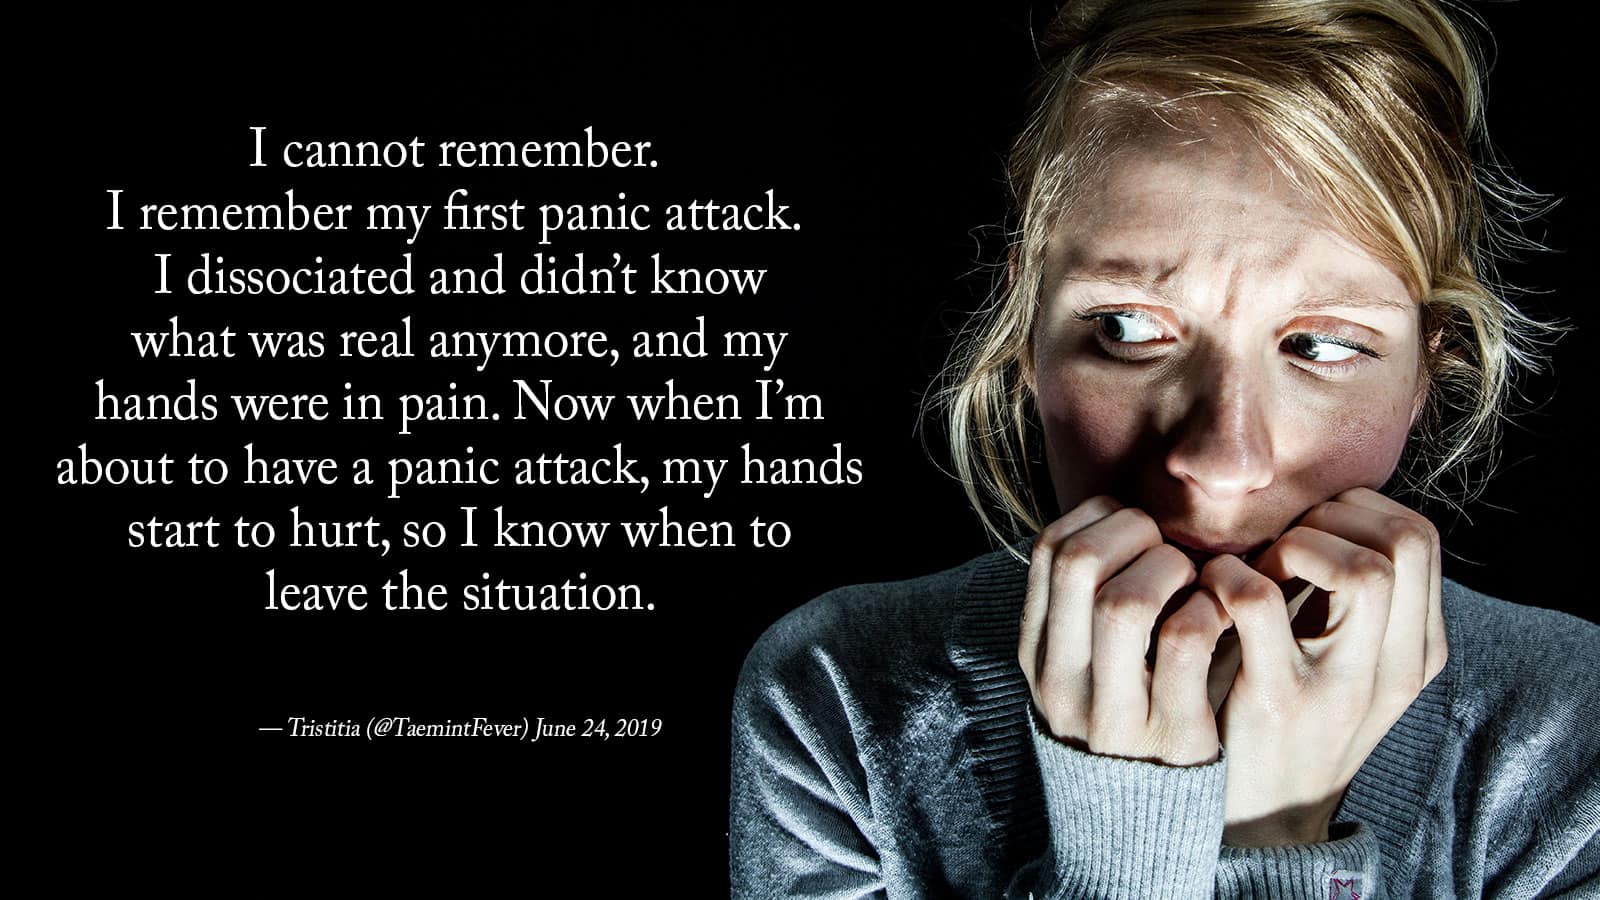 25 People Describe Their First Experience With Anxiety